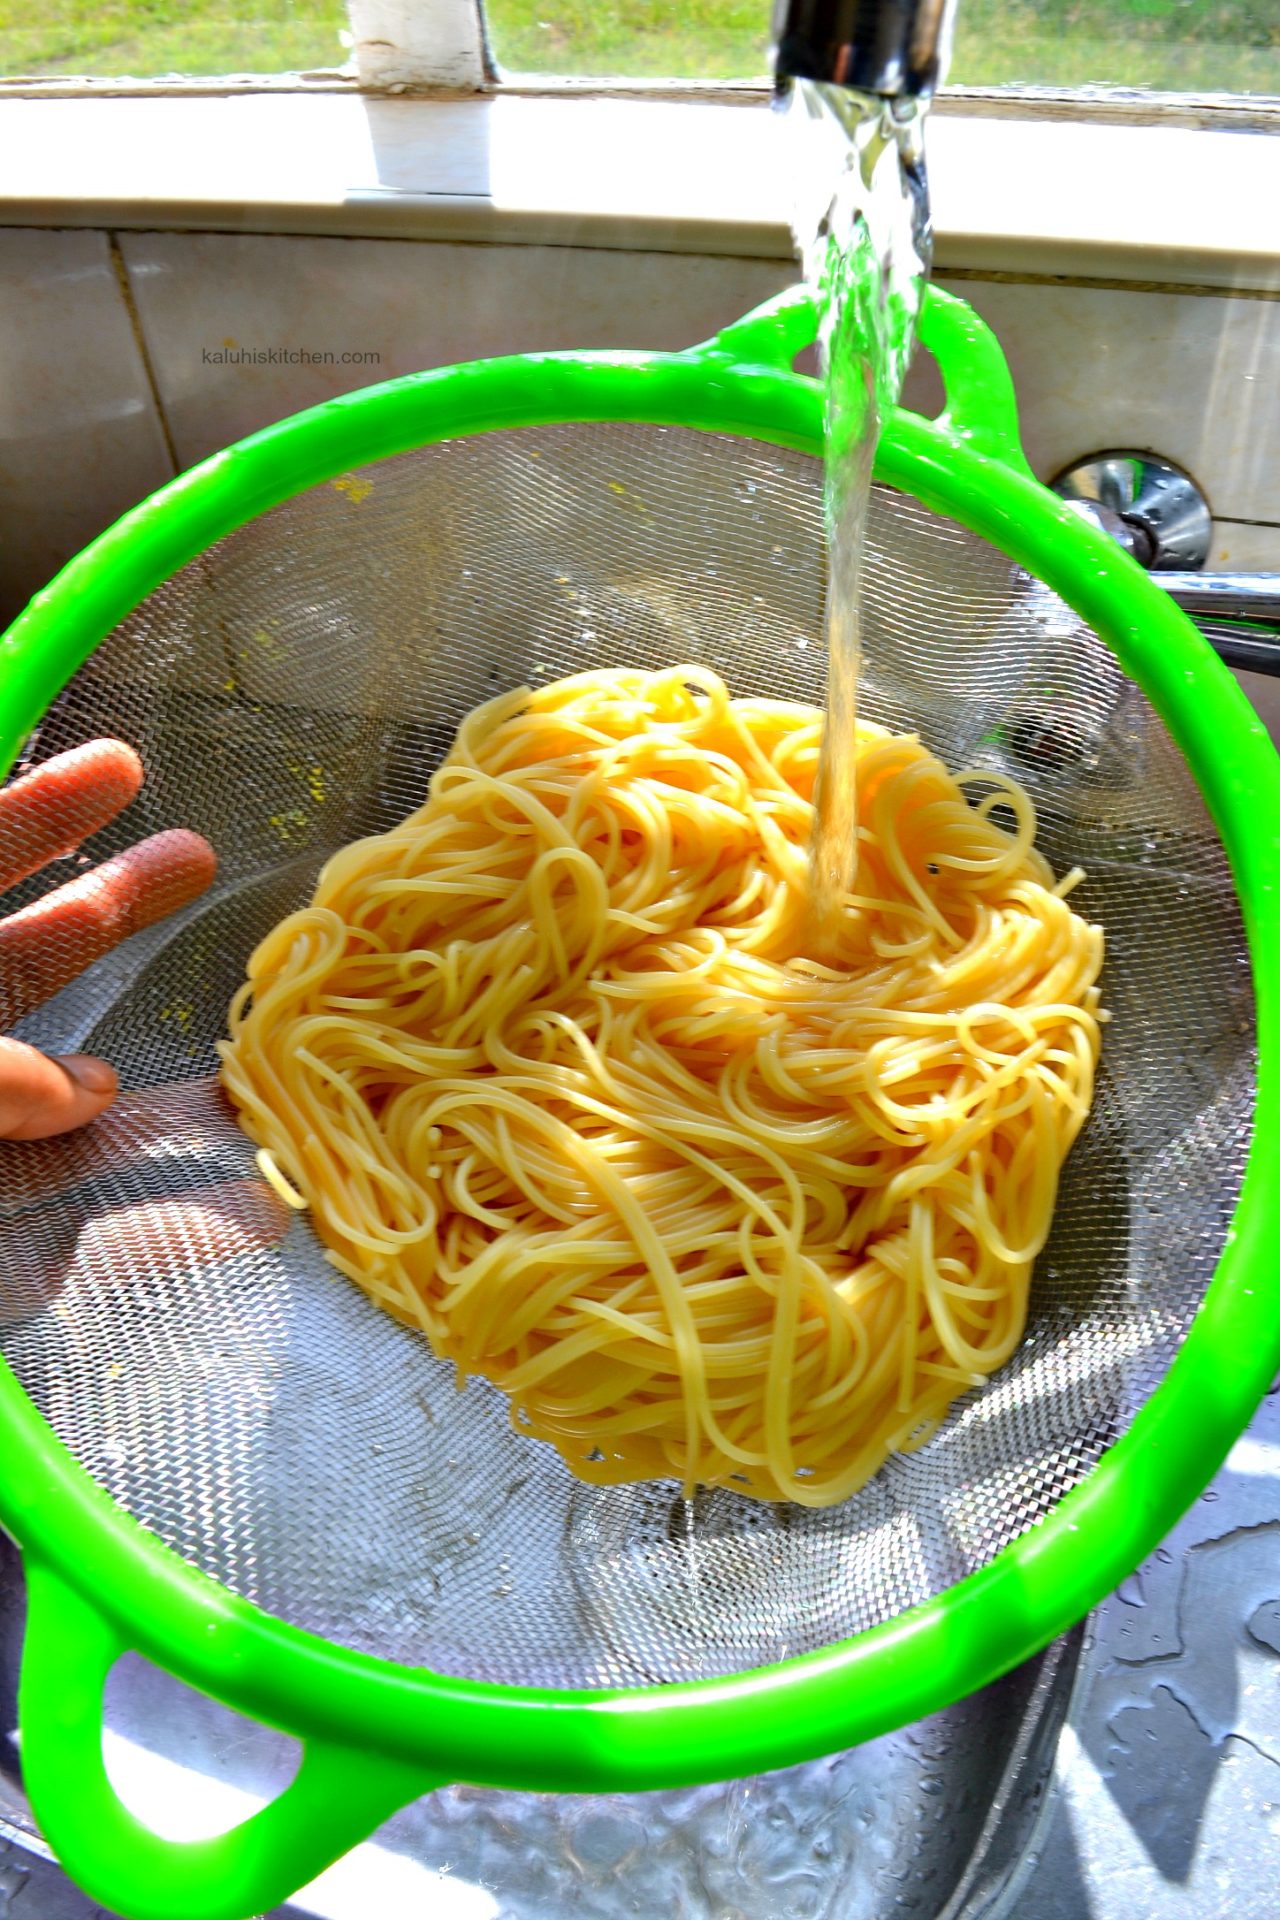 always run your spaghetti over some cold water to prevent it from sticking together_kaluhiskitchen.com